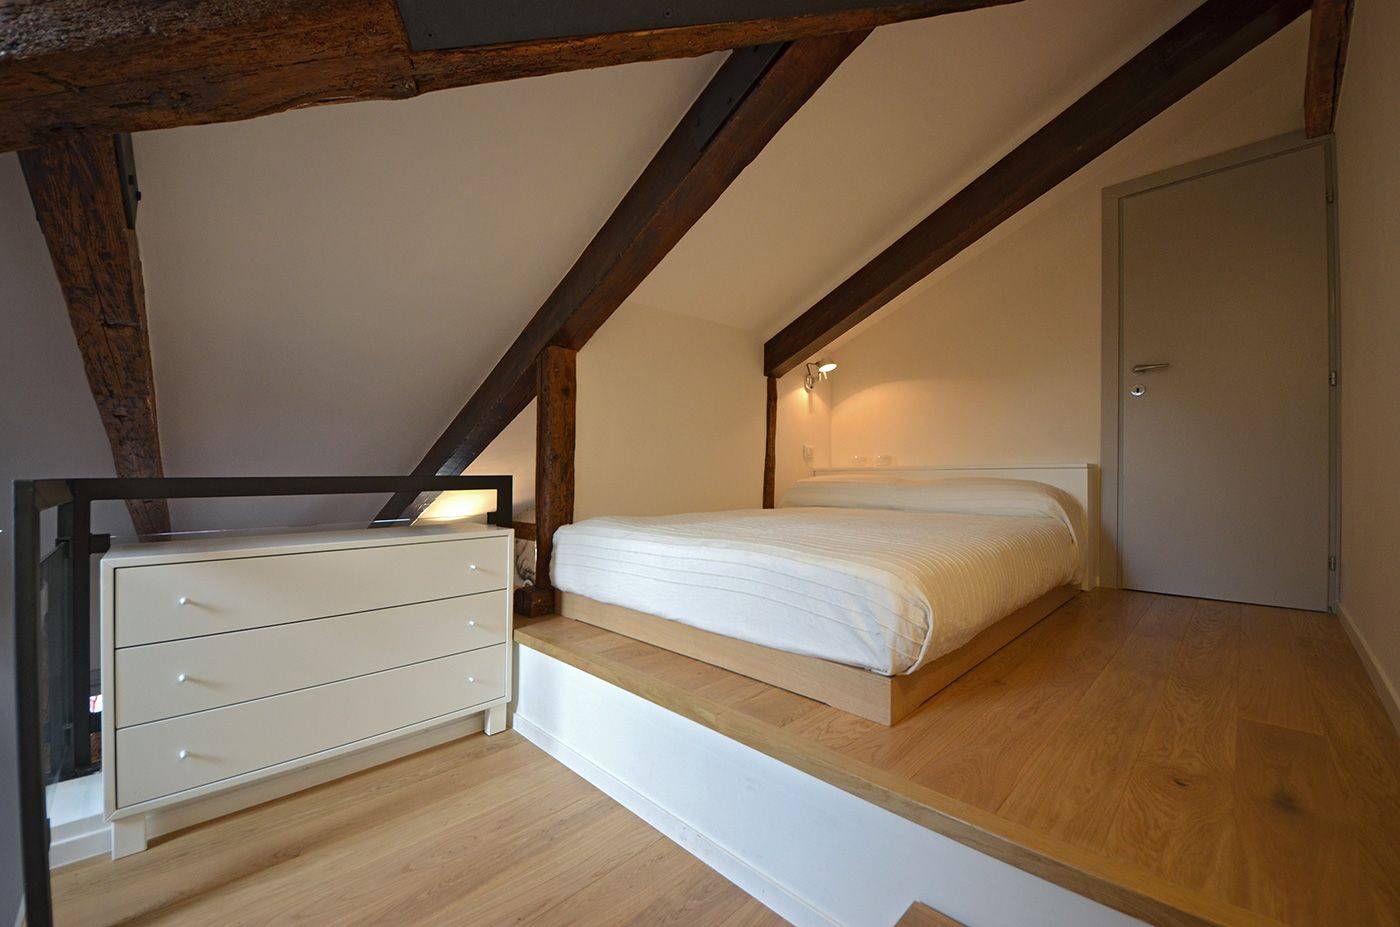 in the attic level there is a 140 cm wide bed 